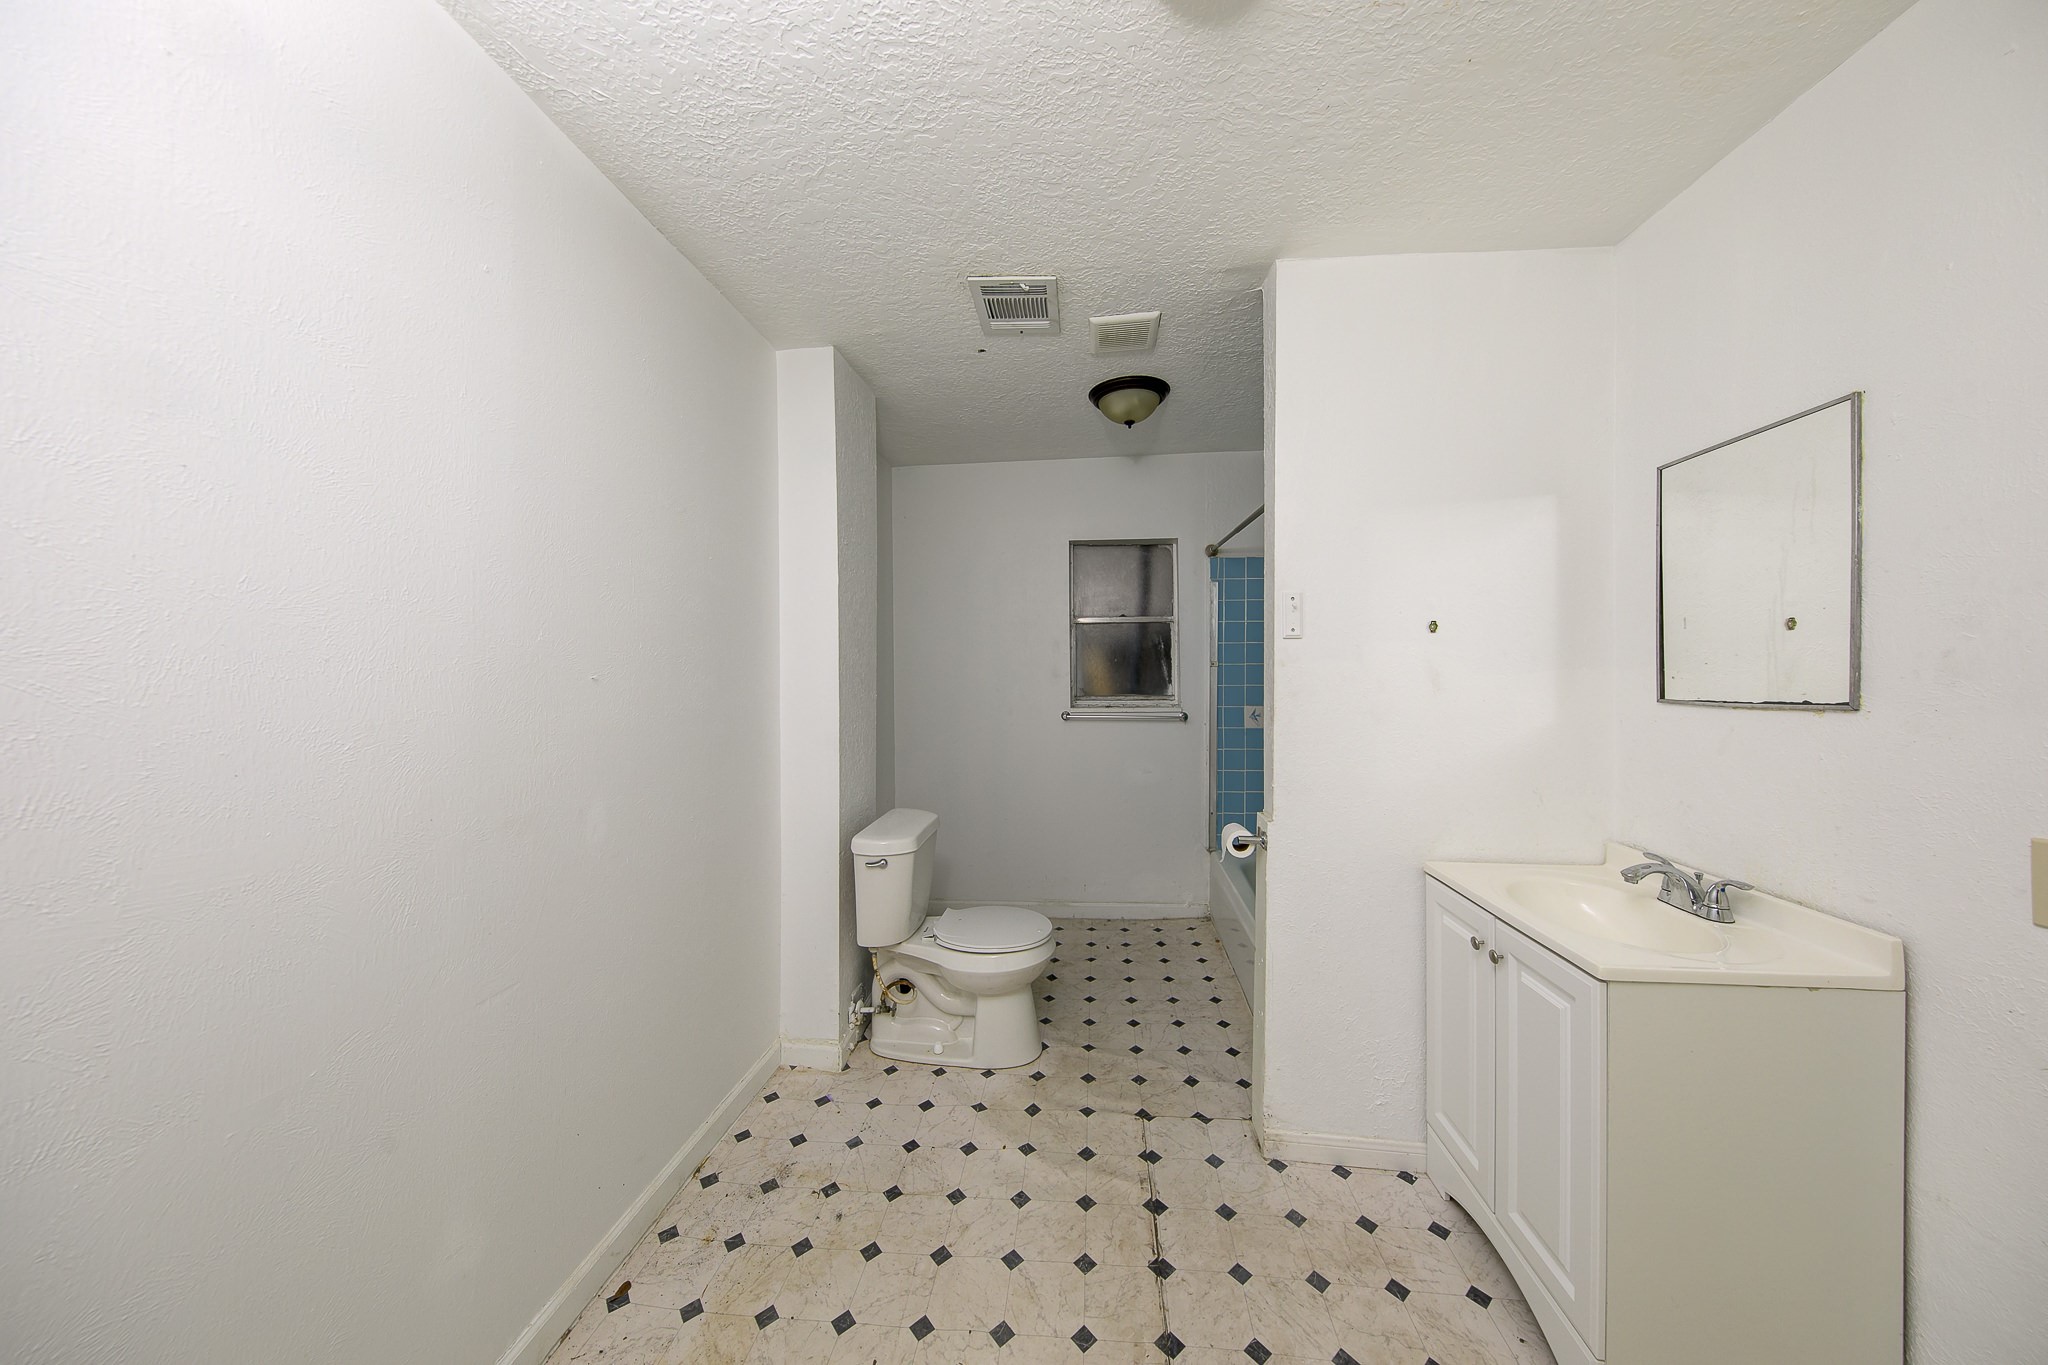 Step into this full bathroom, a space brimming with potential but in need of some revitalization. This room, while still serving its fundamental purpose, is in need of attention and upgrades to restore it to its former glory.